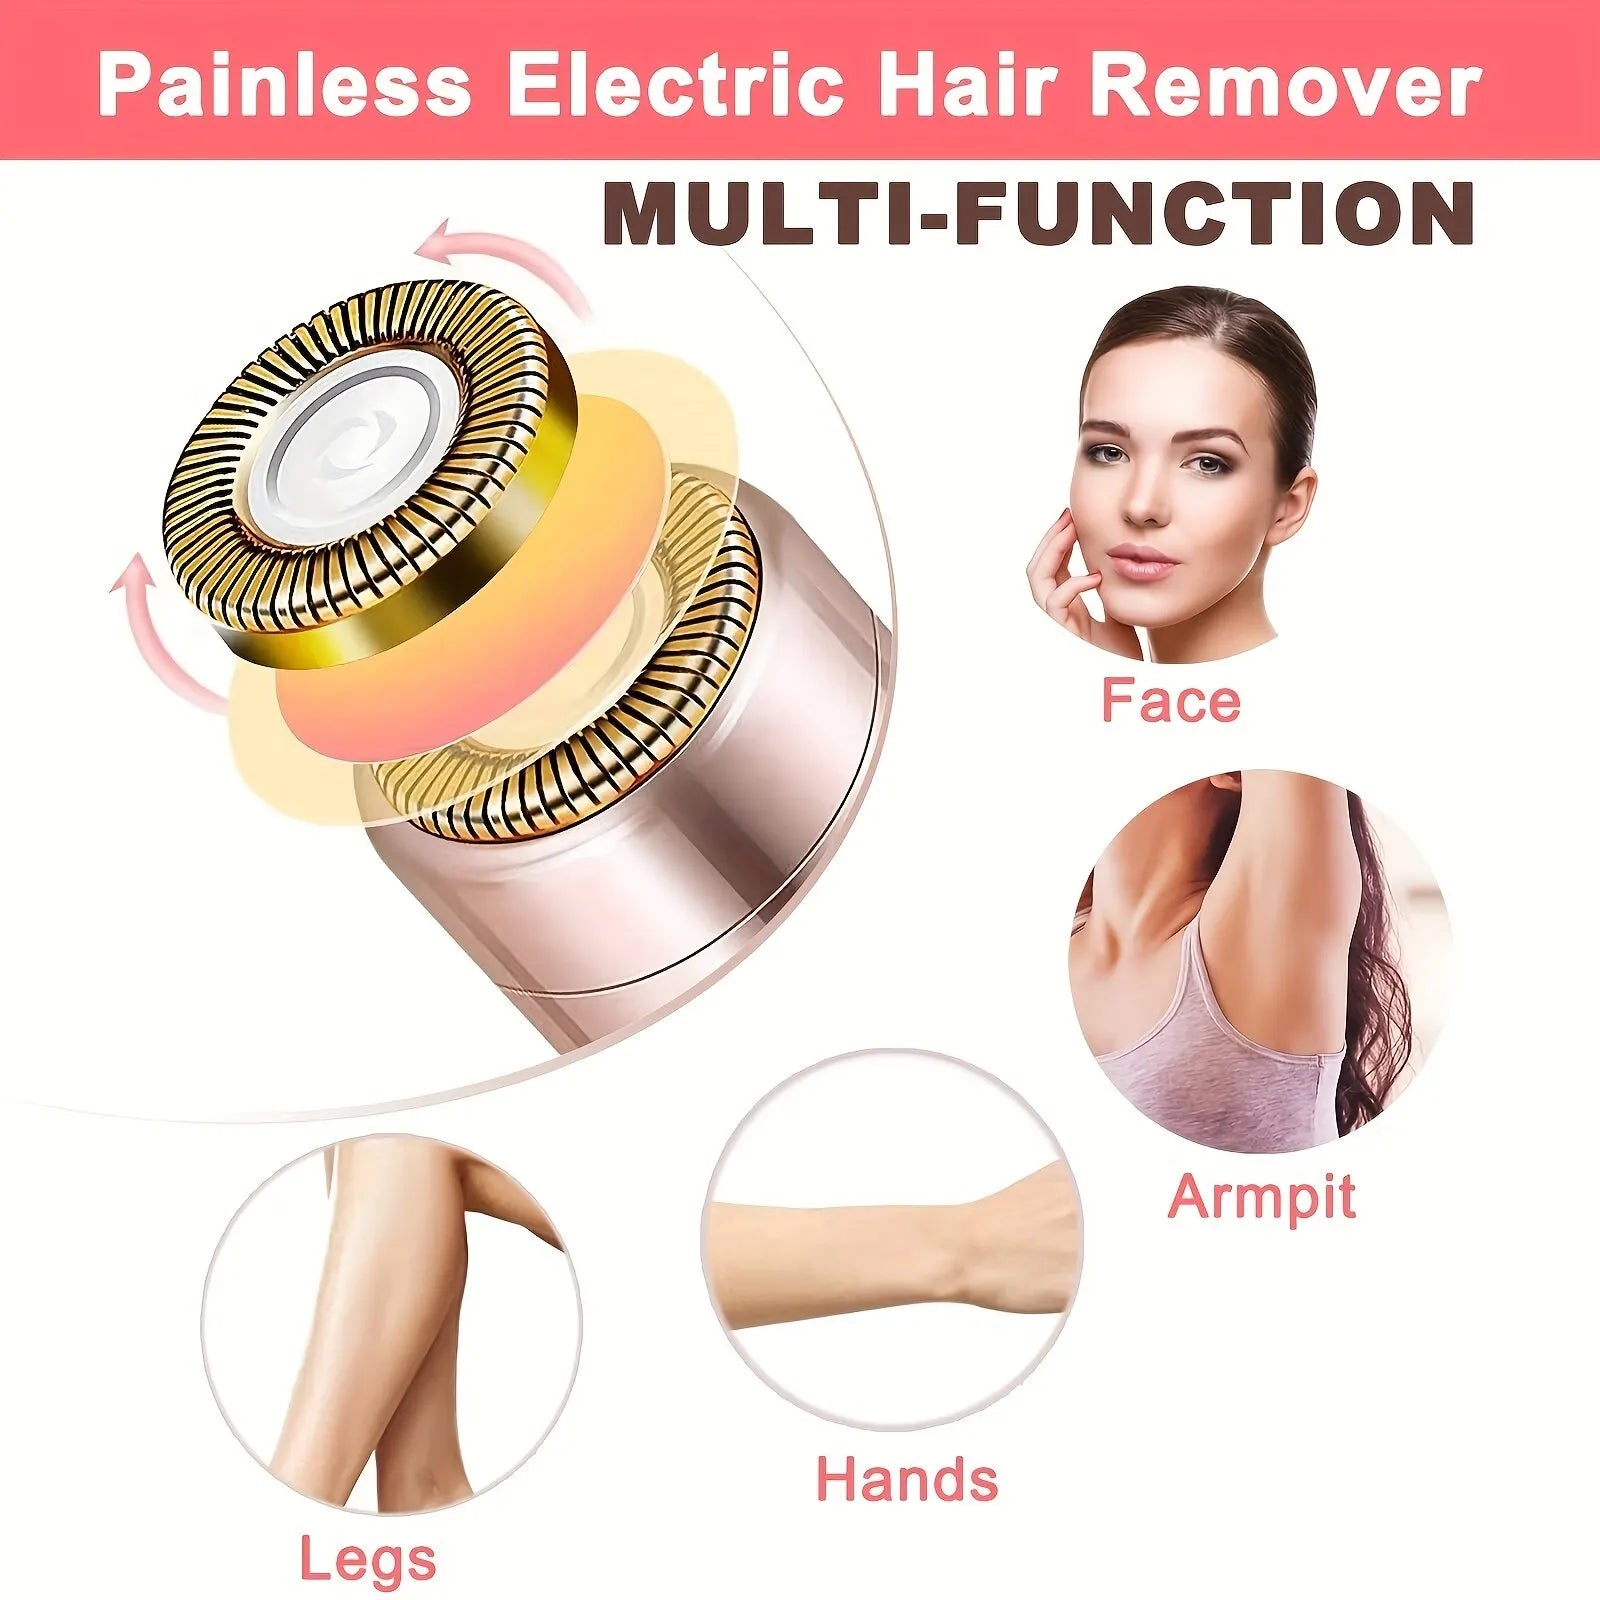 Portable Lipstick Electric Hair Remover: Painless Facial Hair Removal Solution  ourlum.com   